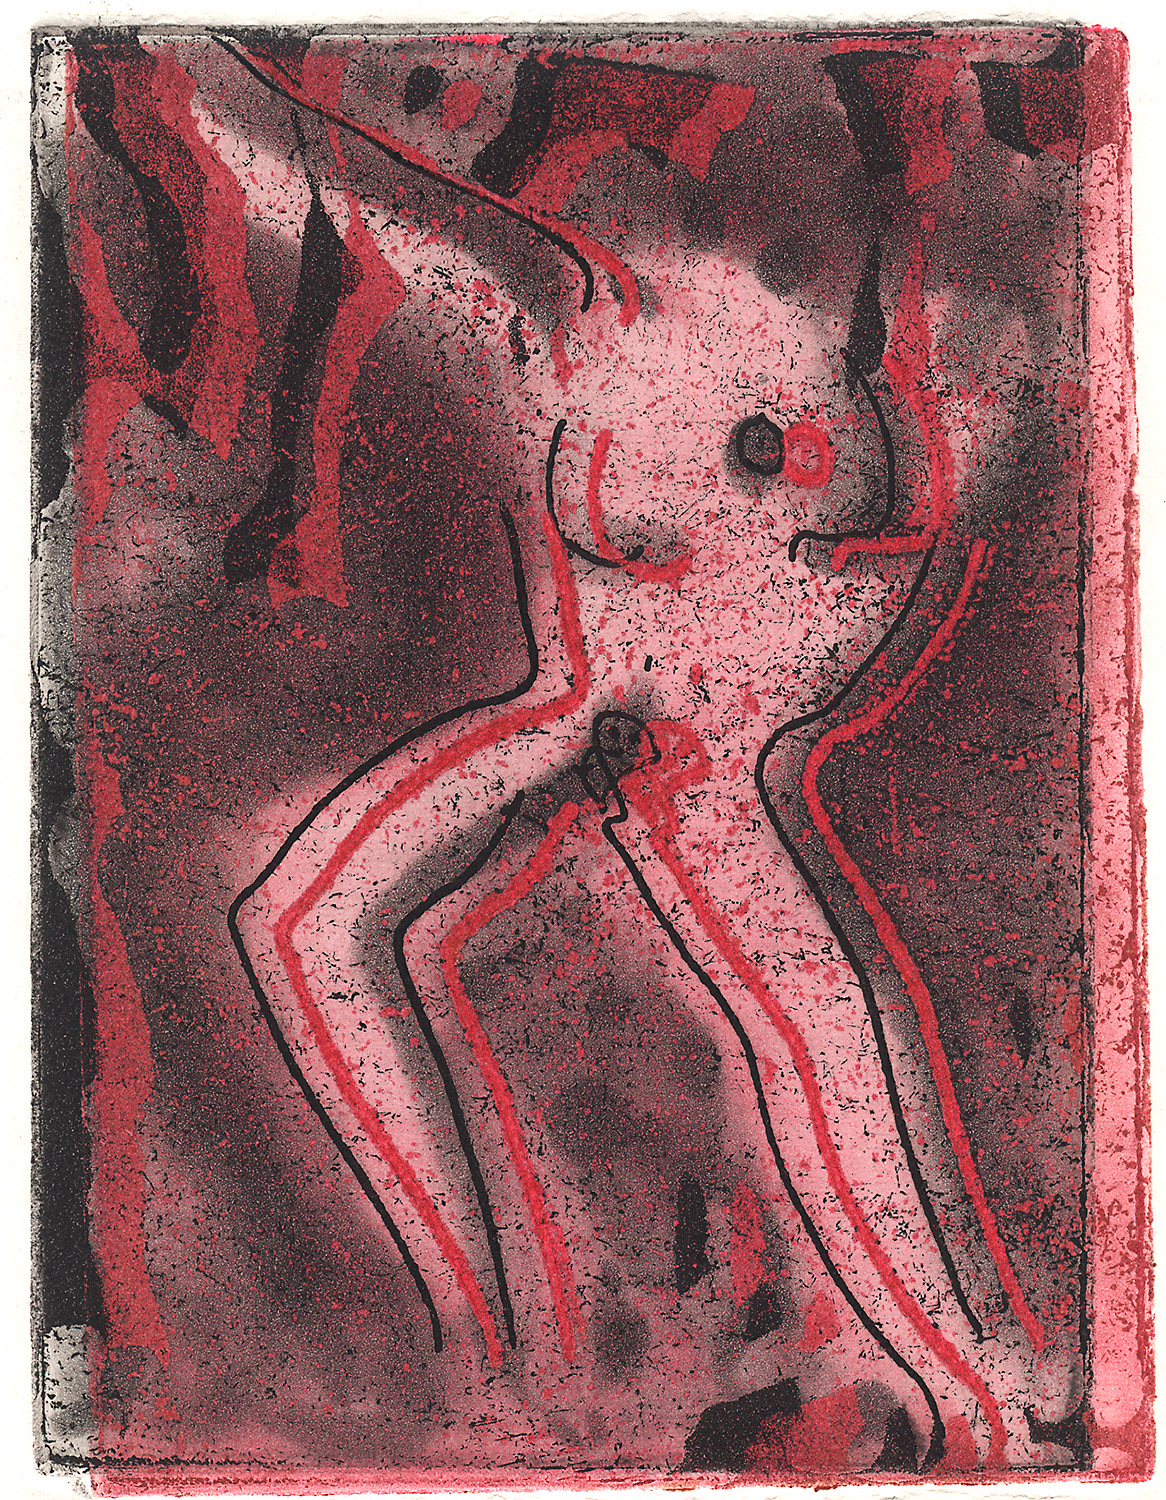 Indira-Cesarine-Portrait-of-a-Girl-Double-Print-Black-and-Red-Intaglio-Ink-on-Rag-Paper-The-Sappho-Series-1993.jpg